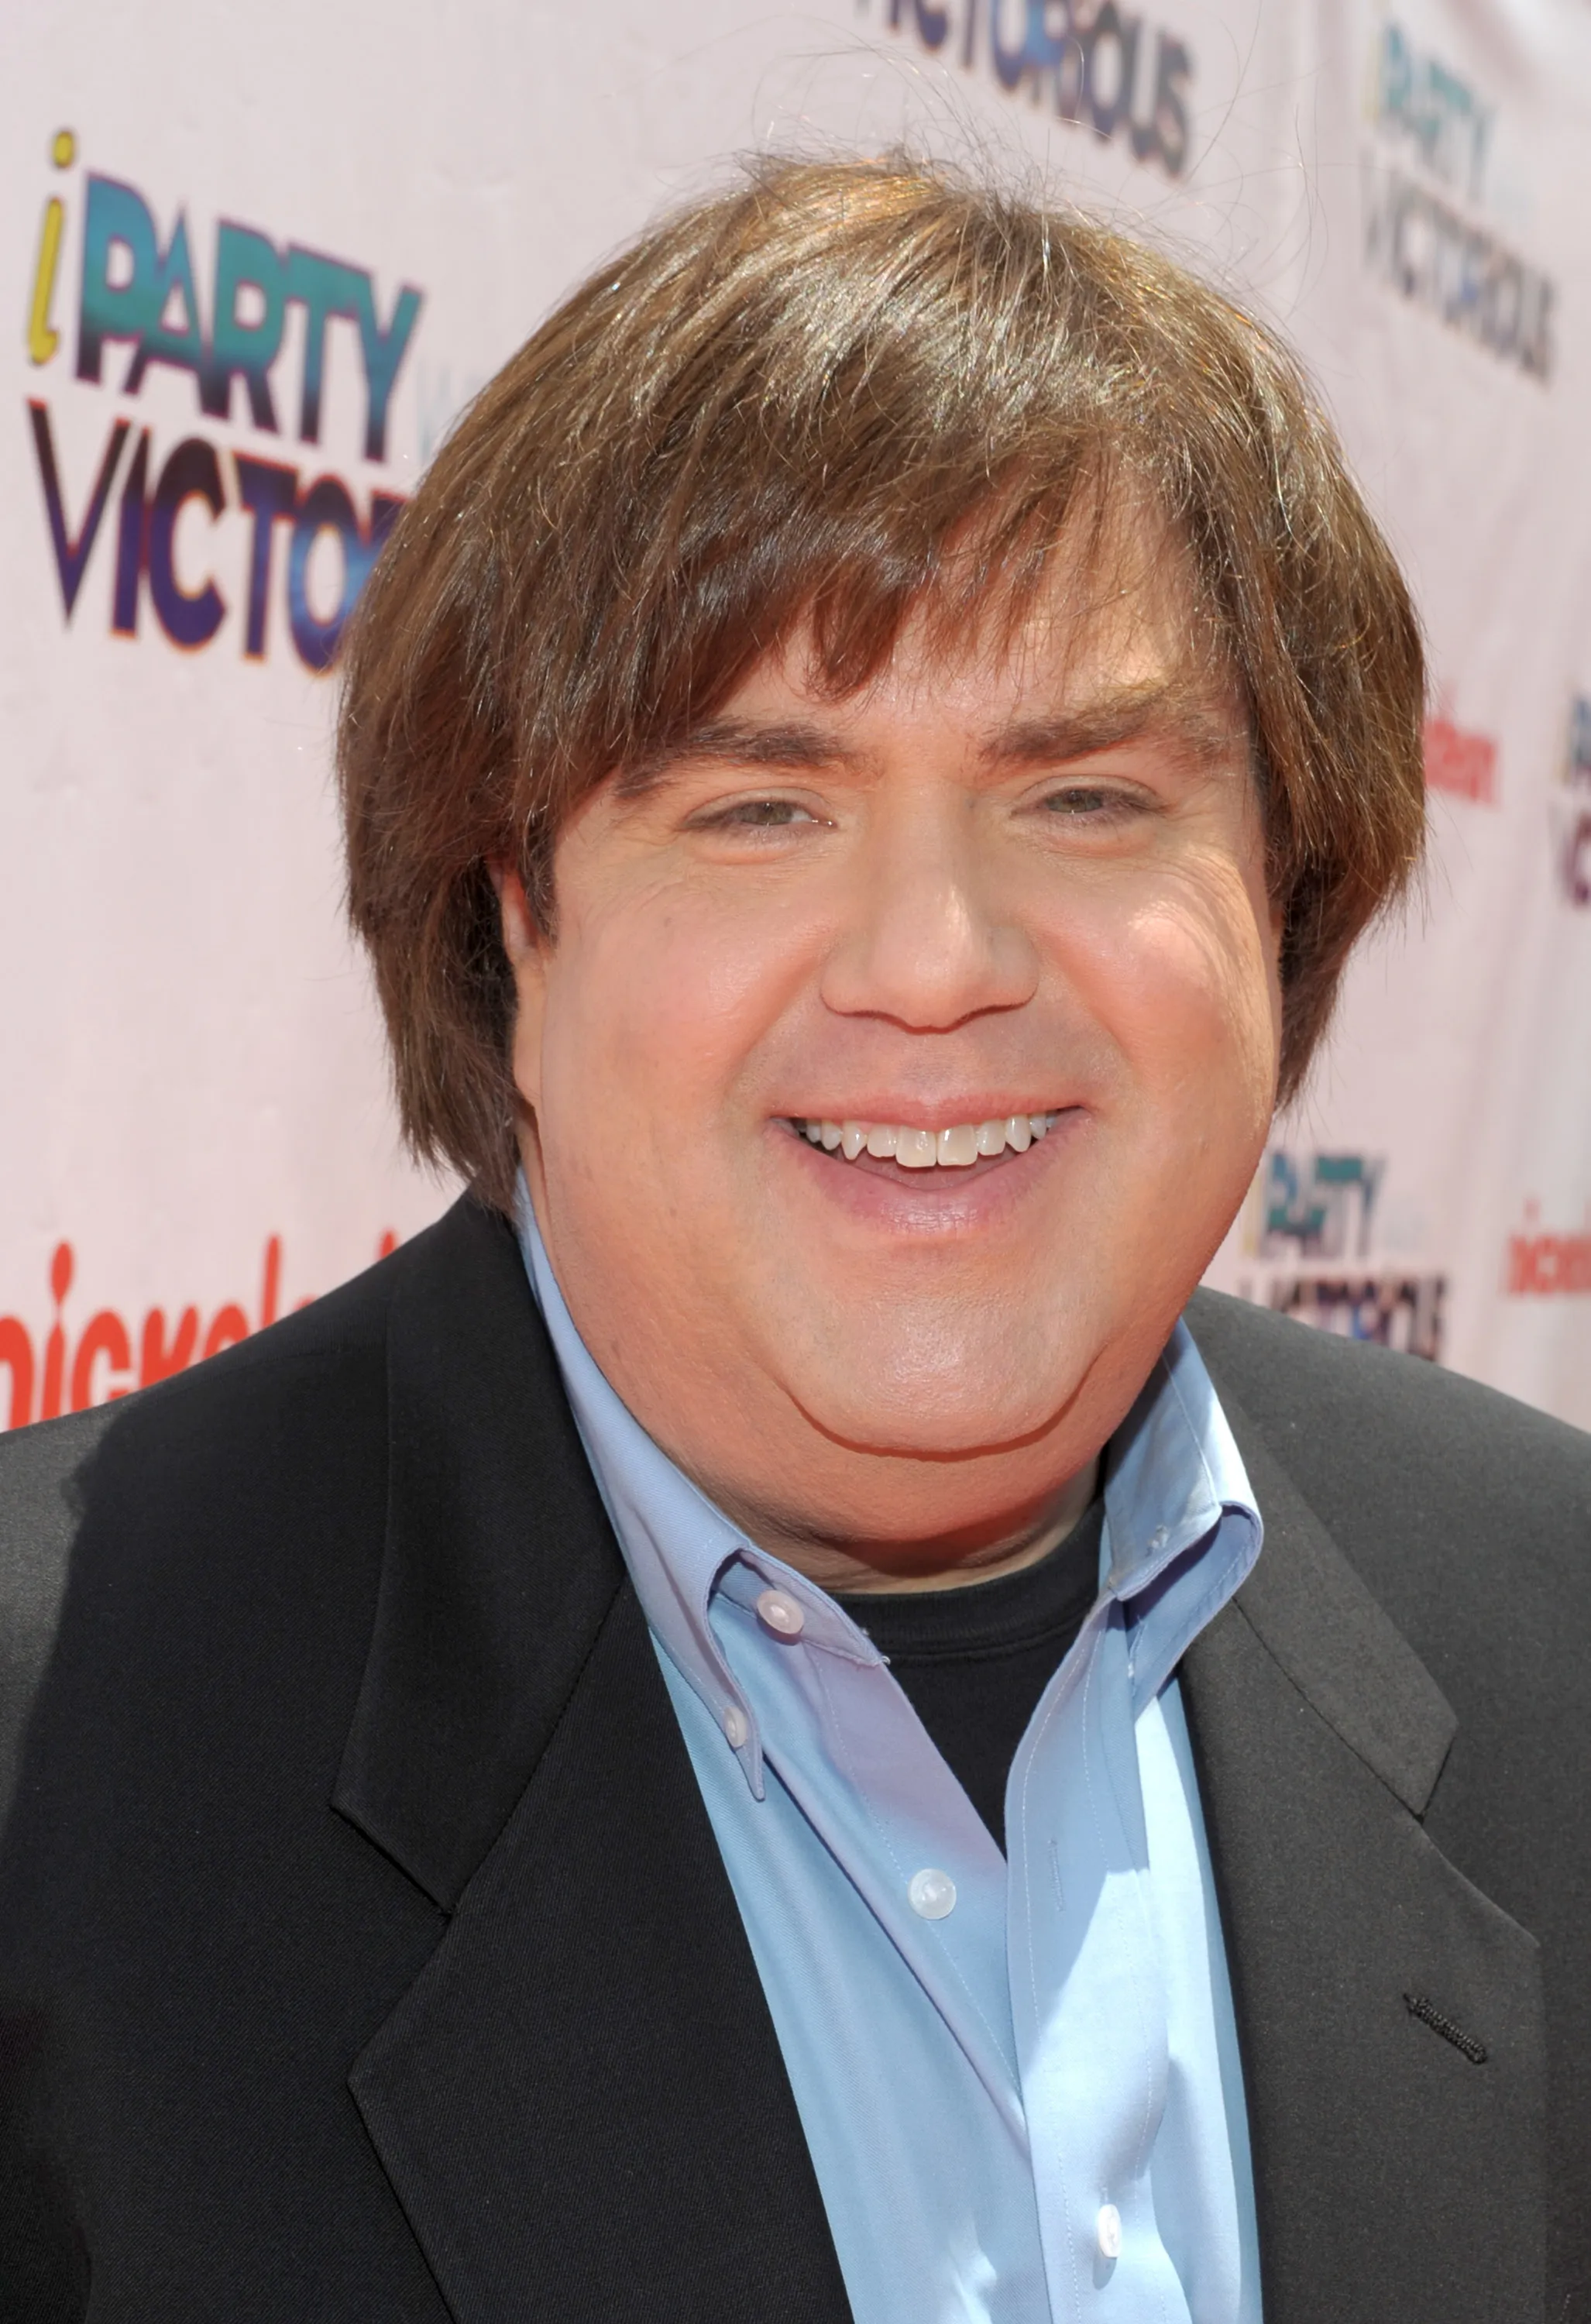 Nickelodeon "iParty With Victorious" Premiere - Orange Carpet, Dan Schneider Sues ‘Quiet on Set’ For Defamation